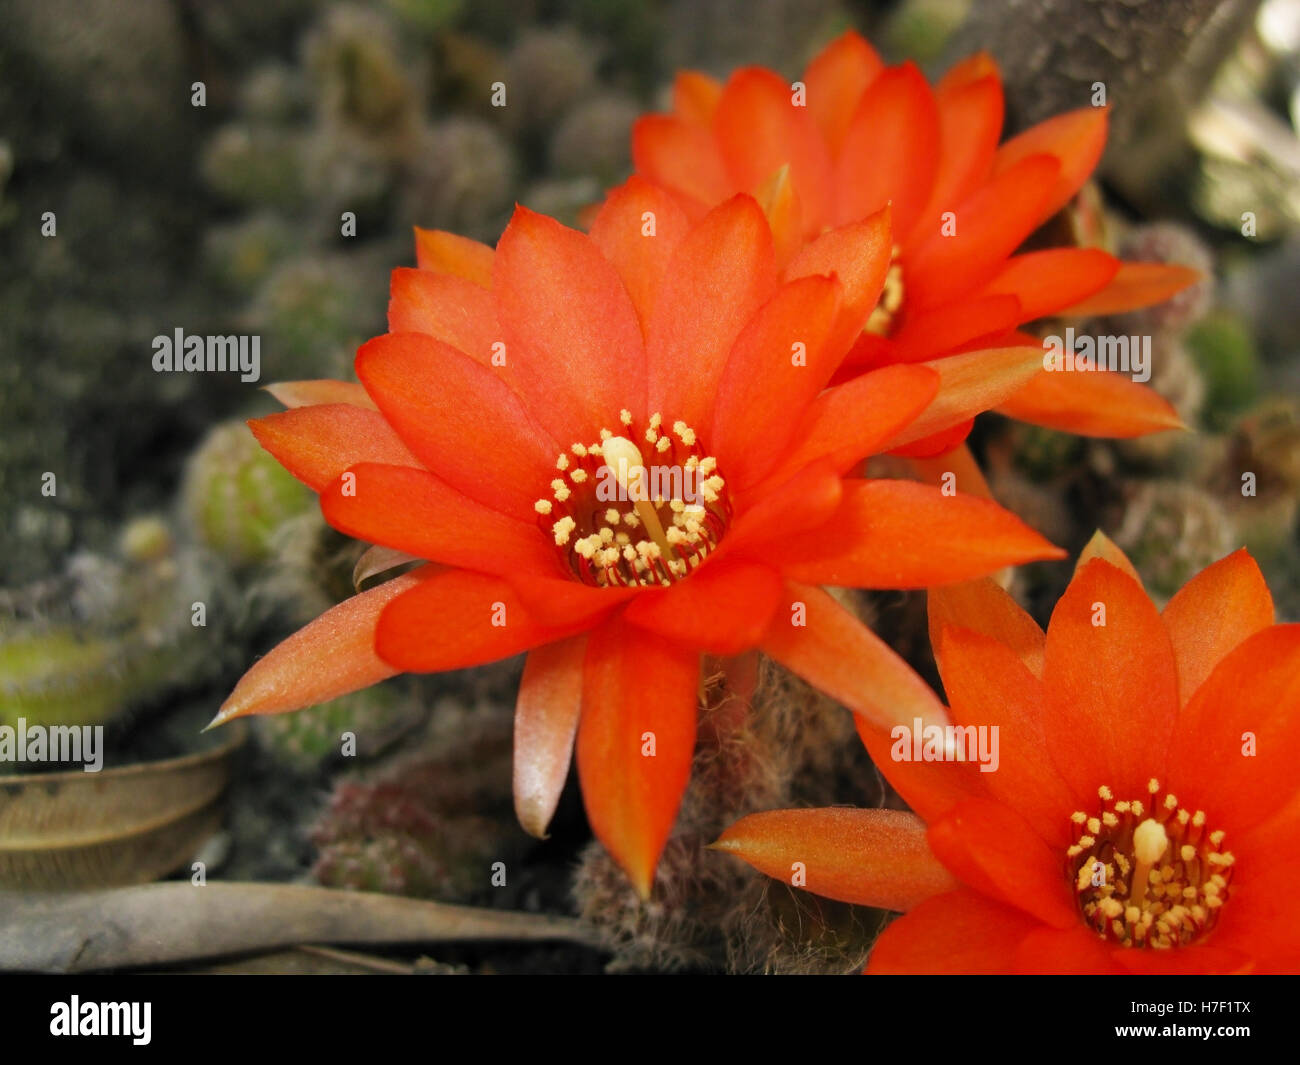 Red cactus flower blooms Stock Photo